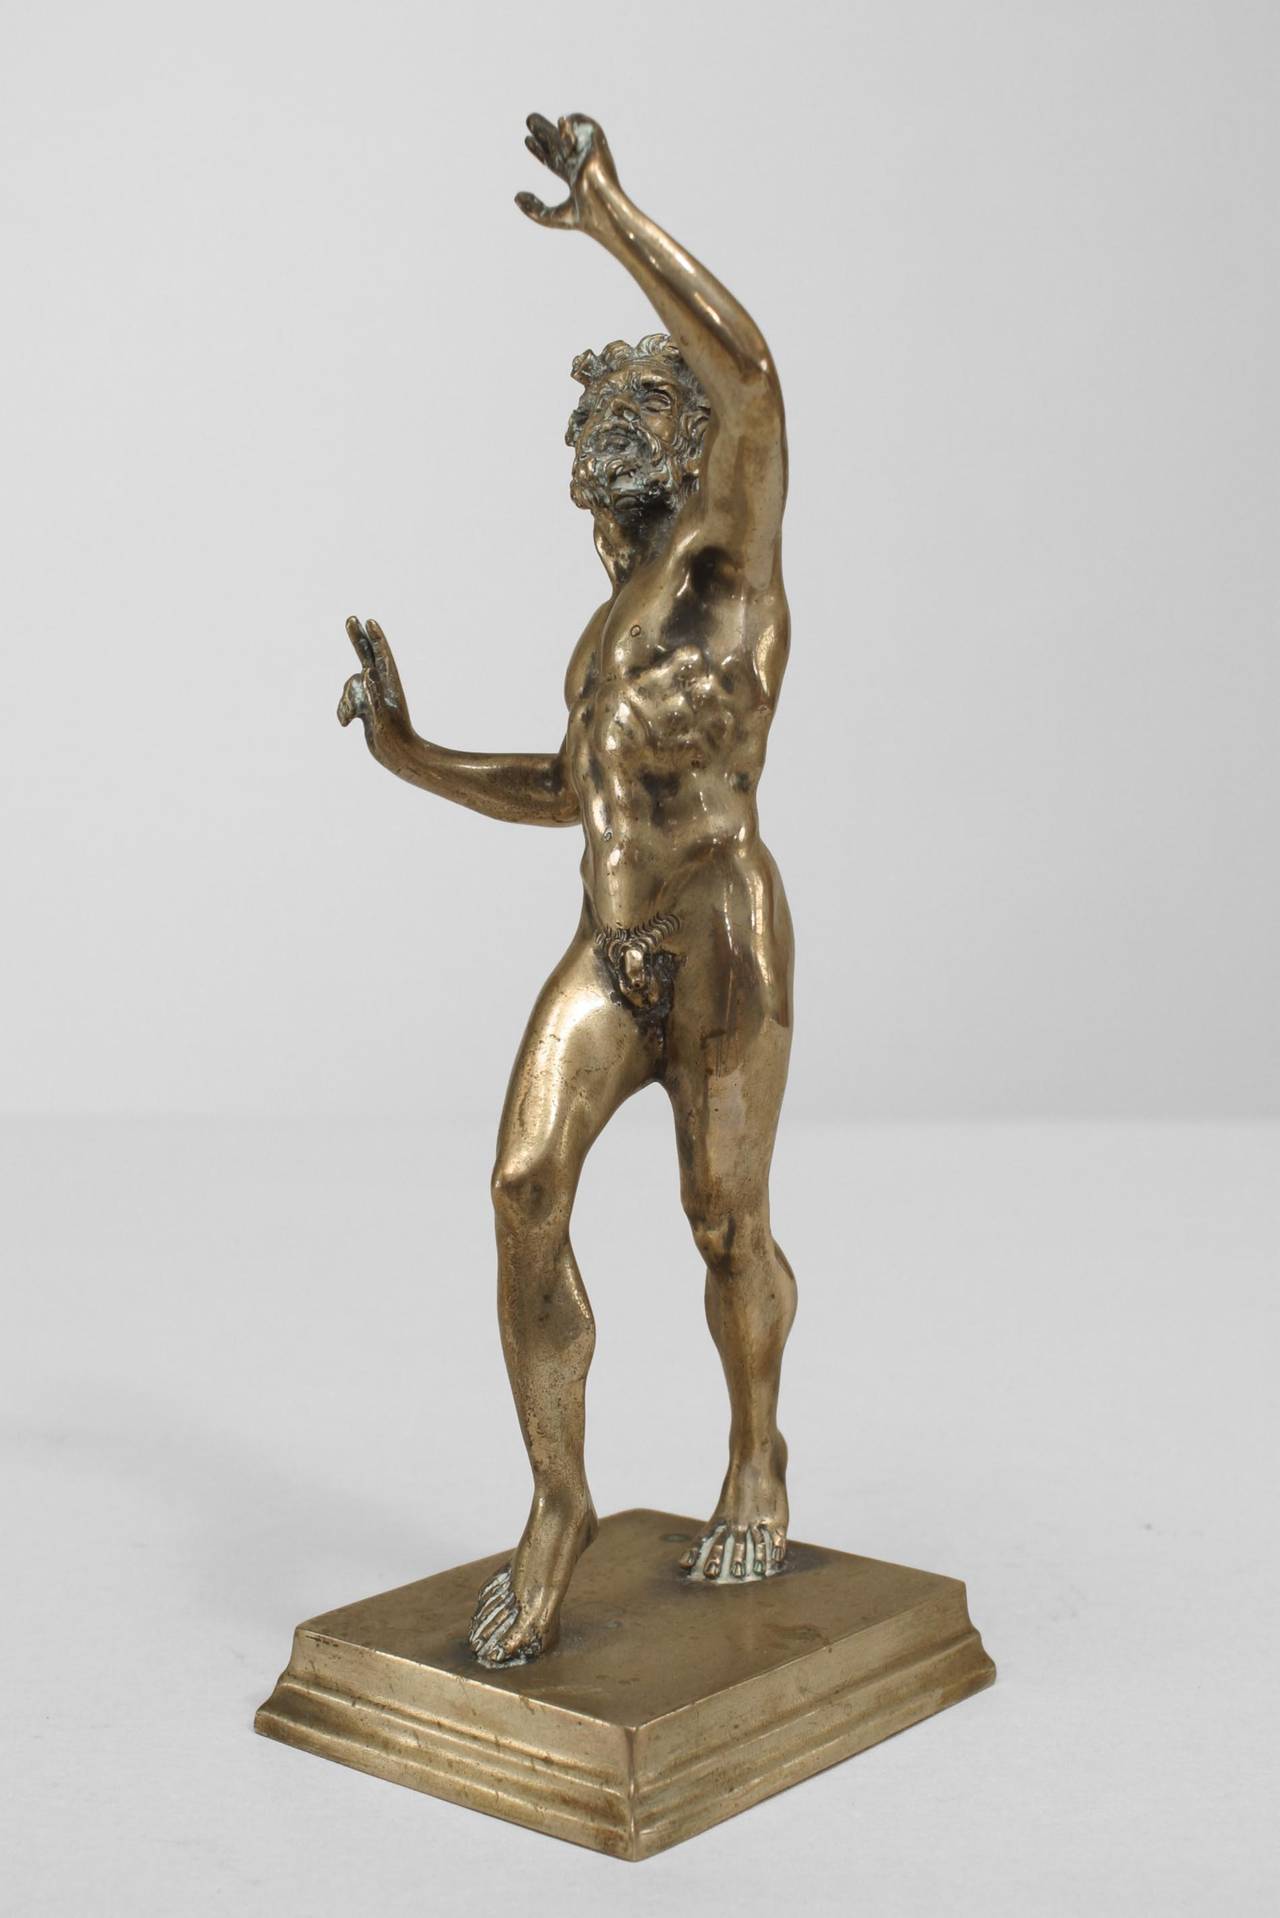 Small silver-plate over bronze nude Greek mythological figure with horns and tail standing on a small tierred base (stamped in corner)
